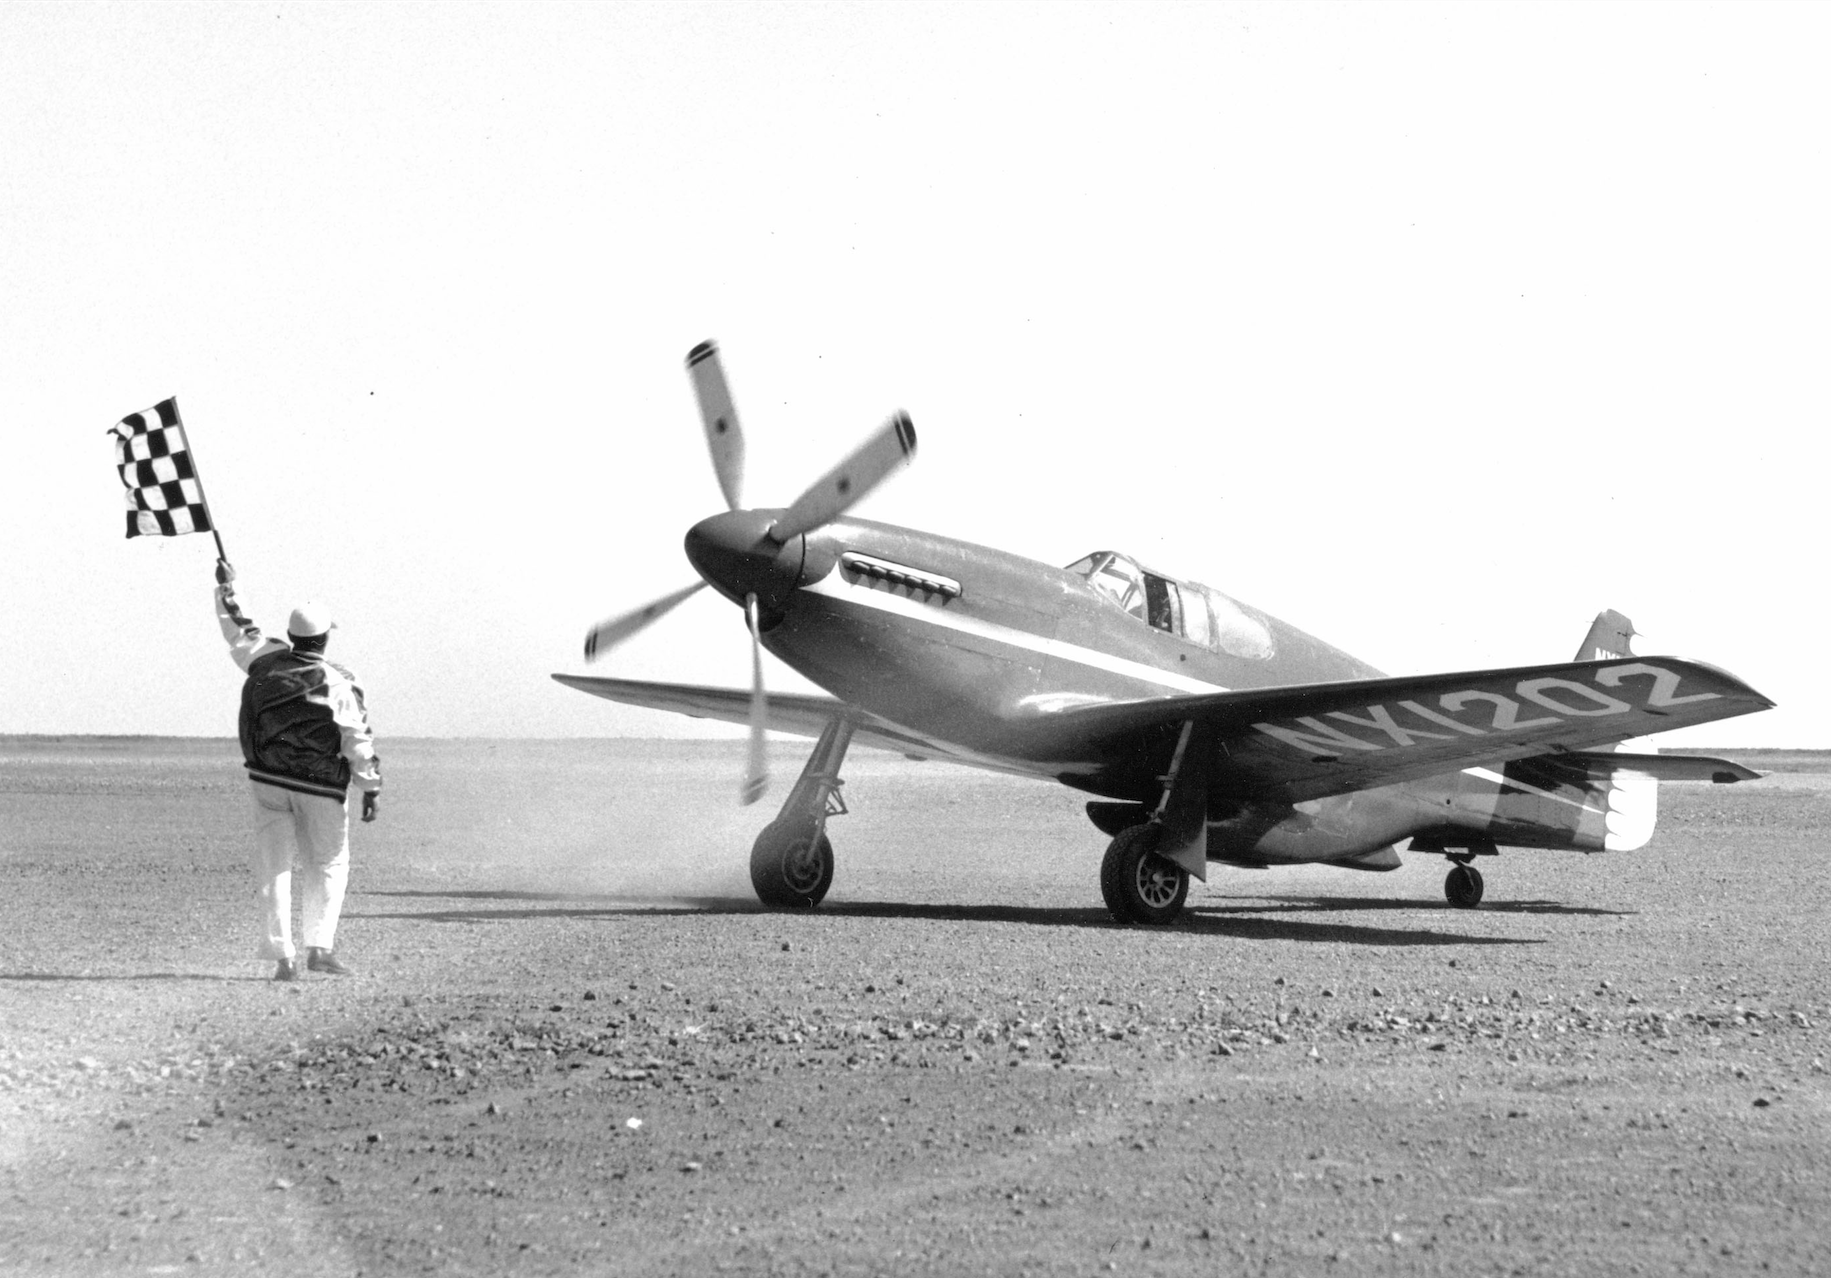 Herman R. "Fish" Salmon awaits the starter's signal at the beginning of the 1949 Bendix Trophy Race at Rosamond Dry Lake. Mantz won the three years with his P-51C, NX1202, Blaze of Noon. (San Diego Air and Space Museum Archive)